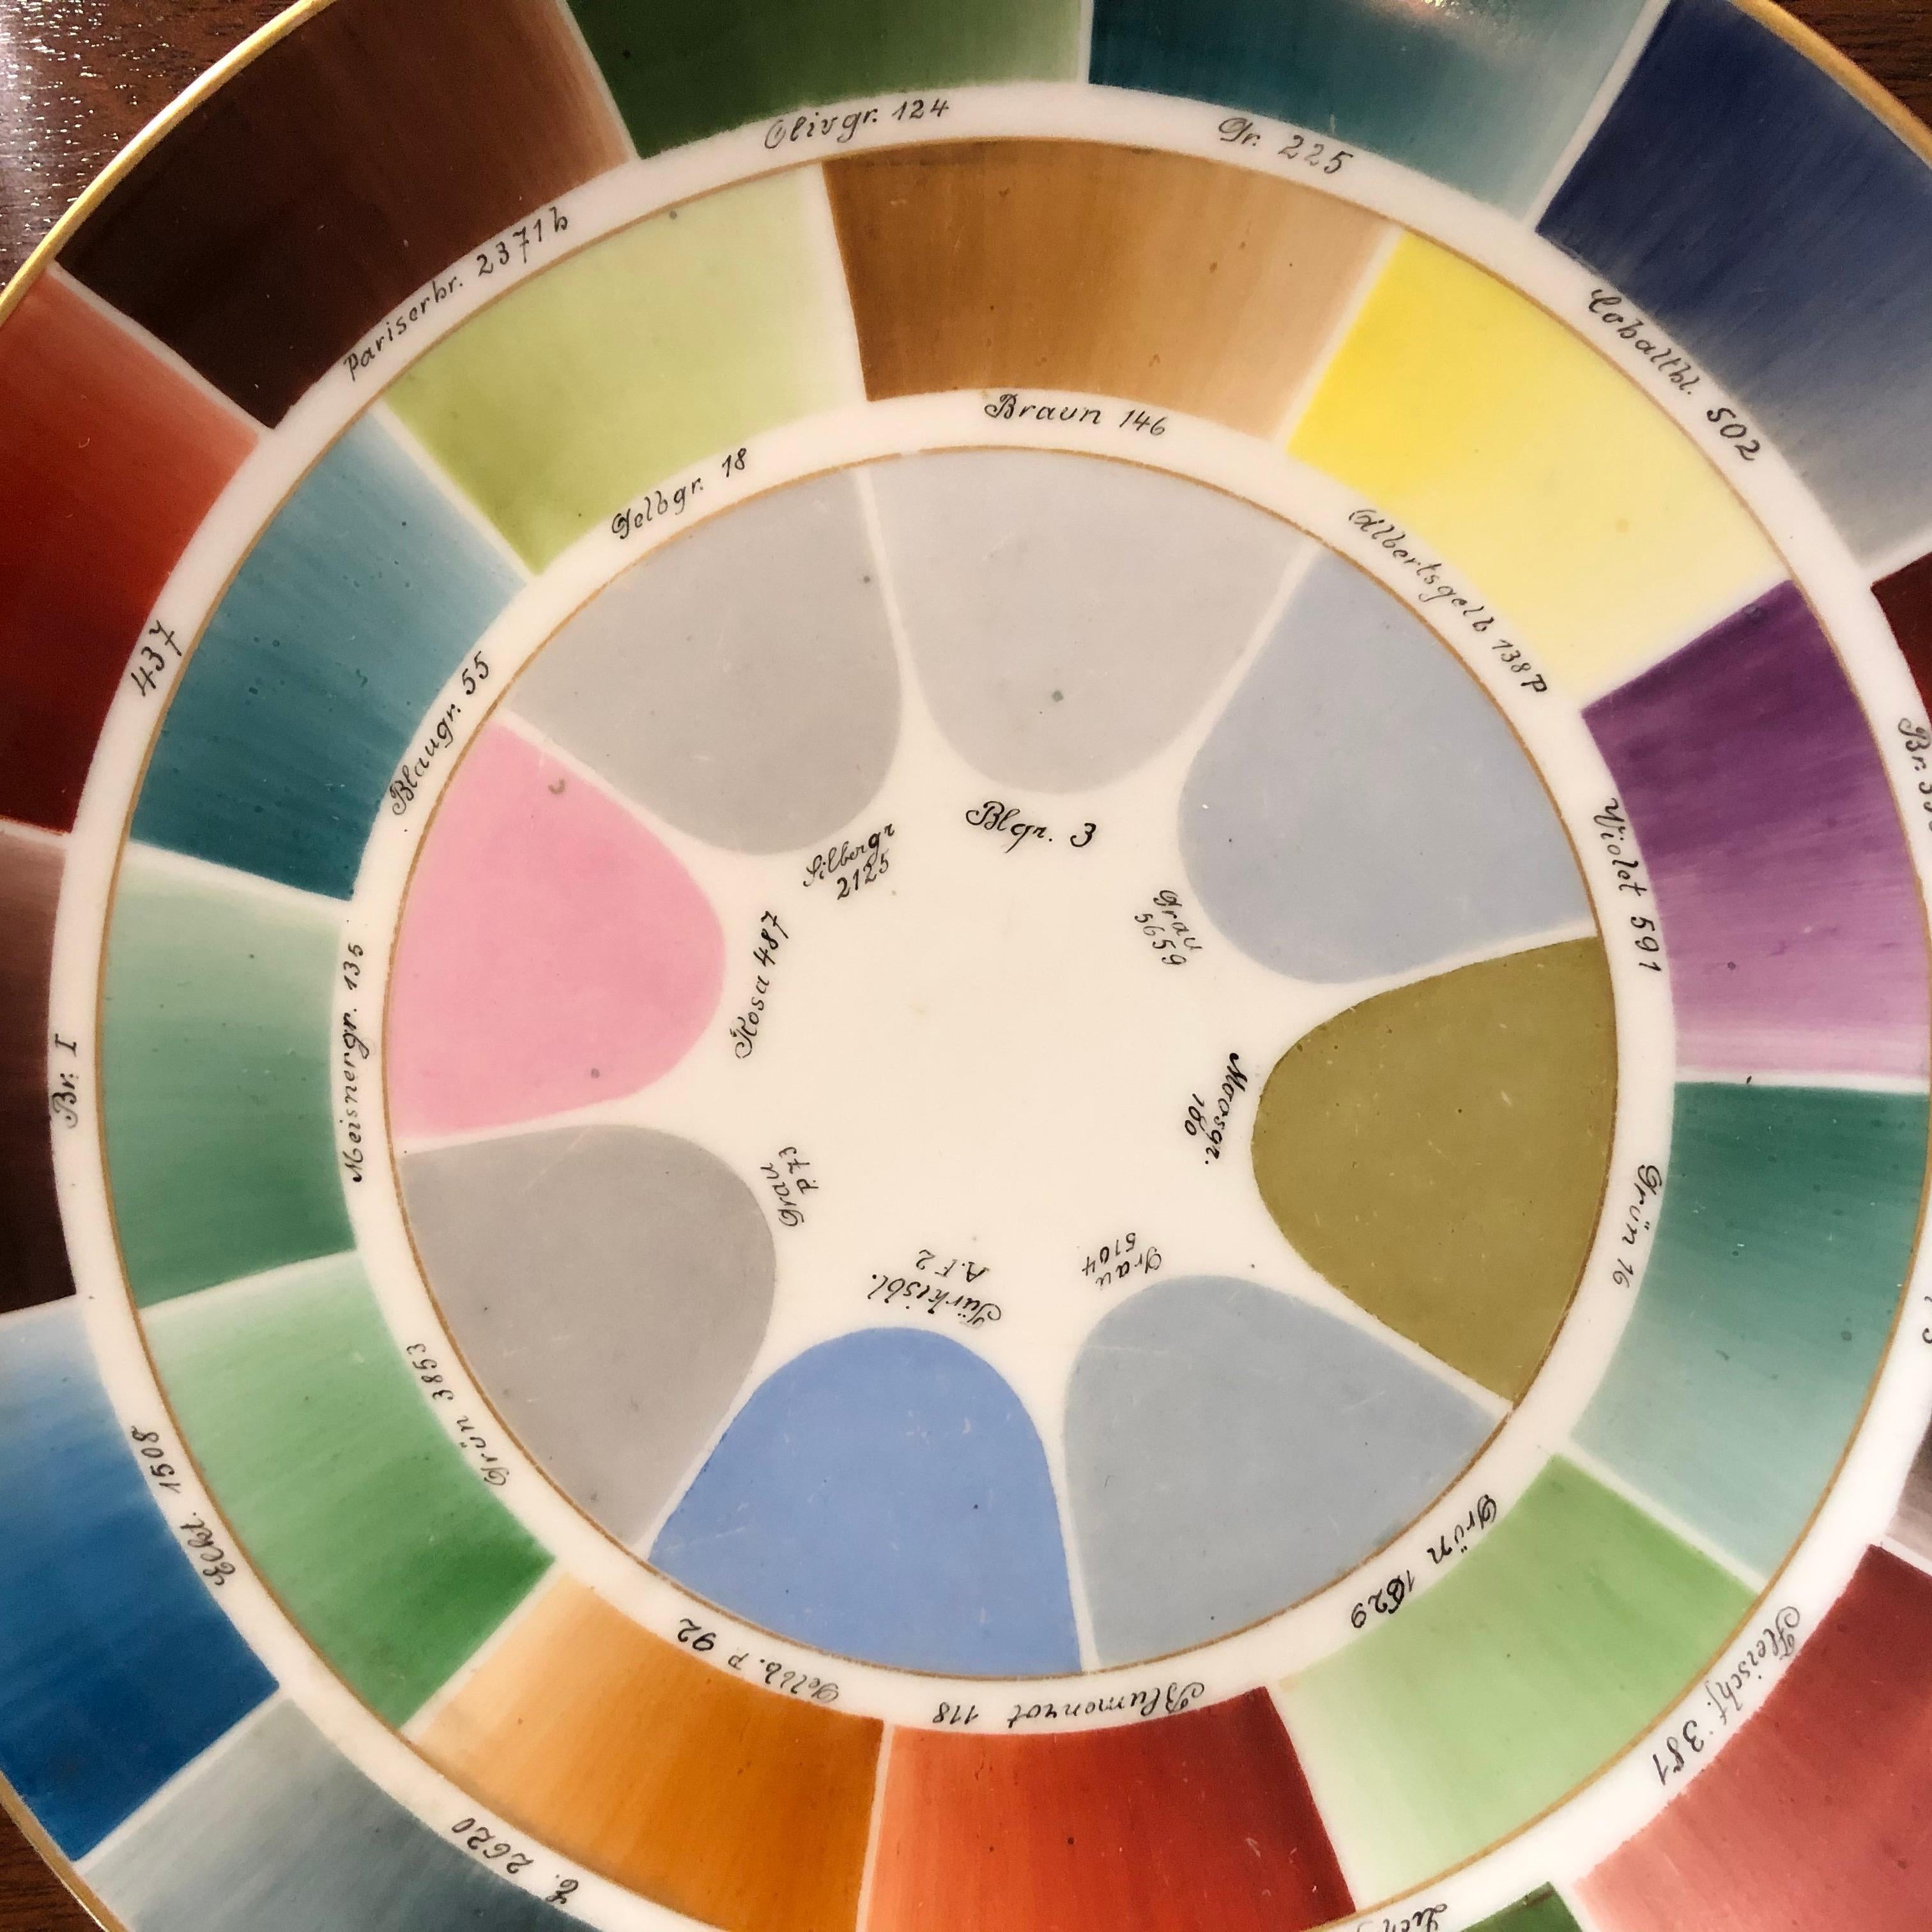 A rare porcelain factory color sample plate, hand painted with a gilded edge, showing the wide range of colors across the spectrum available, in the form of a color wheel, each one shaded and identified with its name in German. The porcelain plate